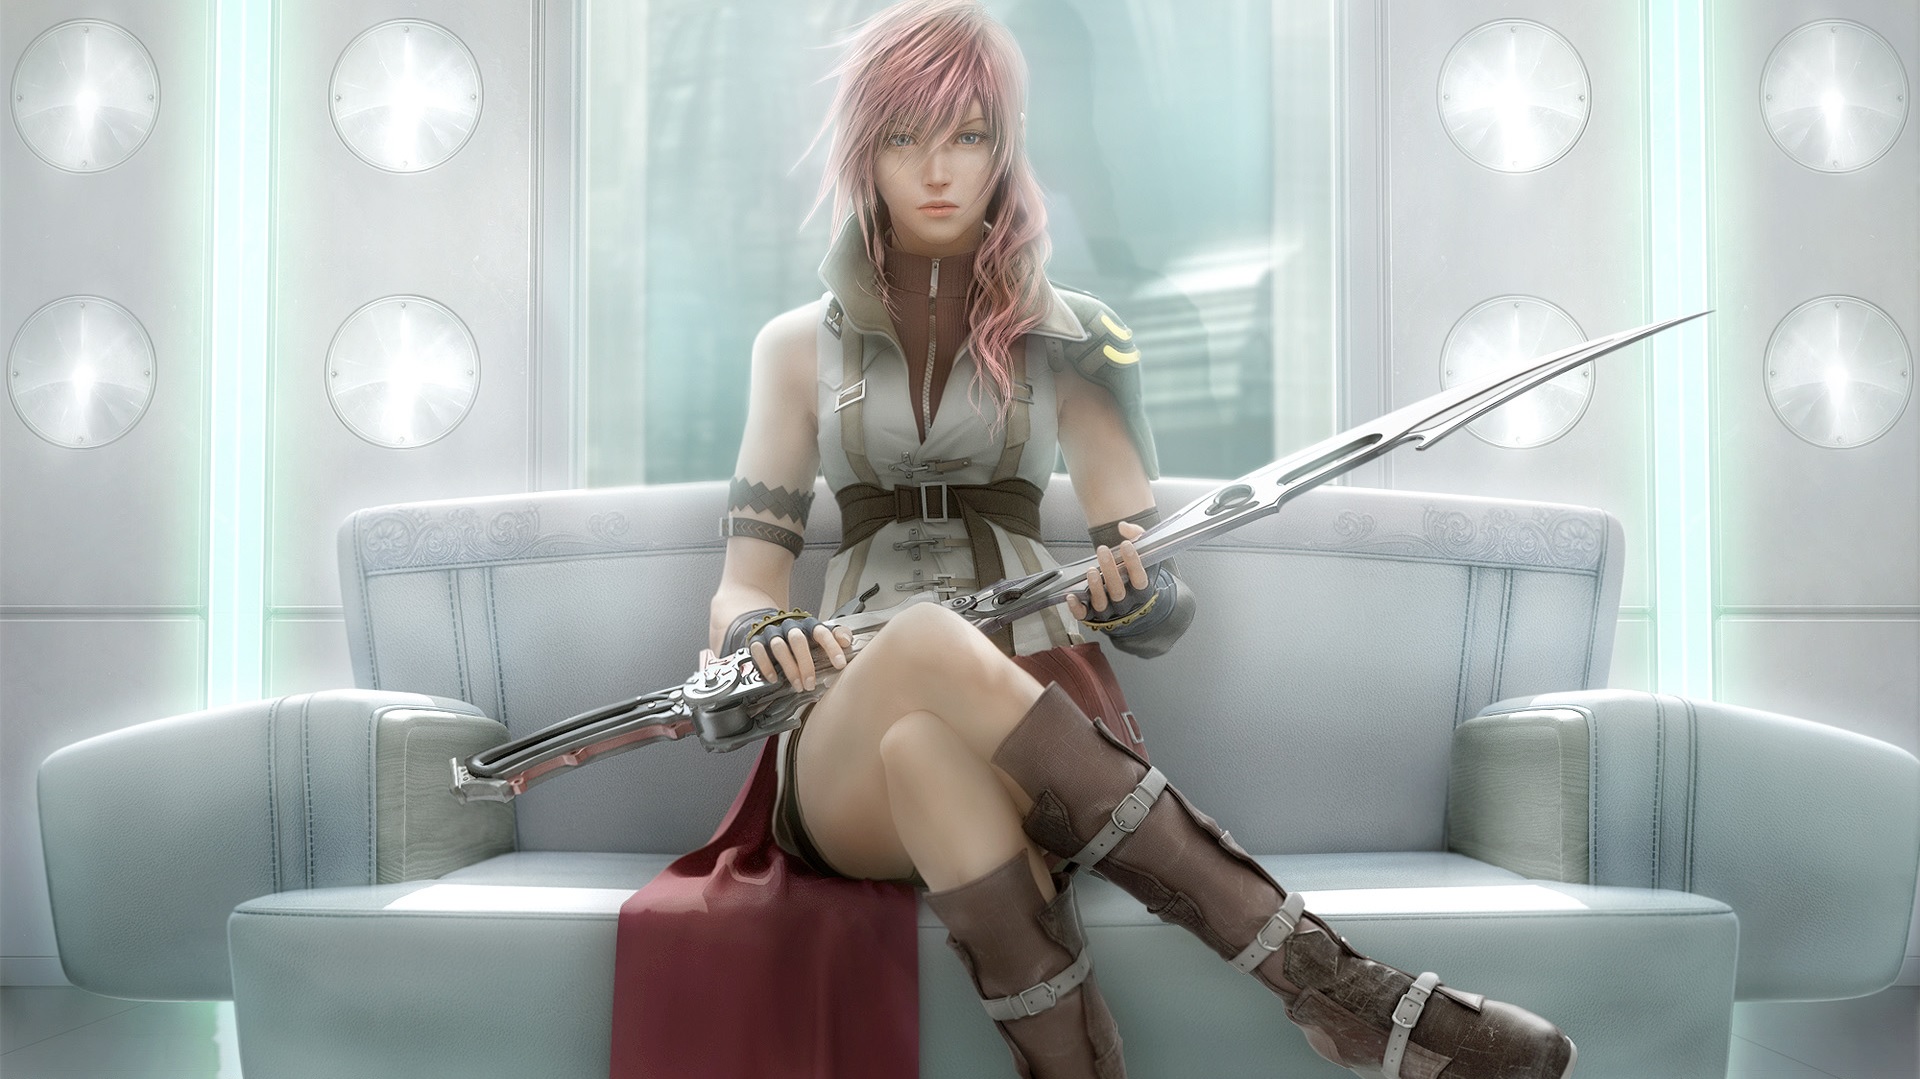 Final Fantasy Xiii Coming To Pc This October Pc Requirements Revealed